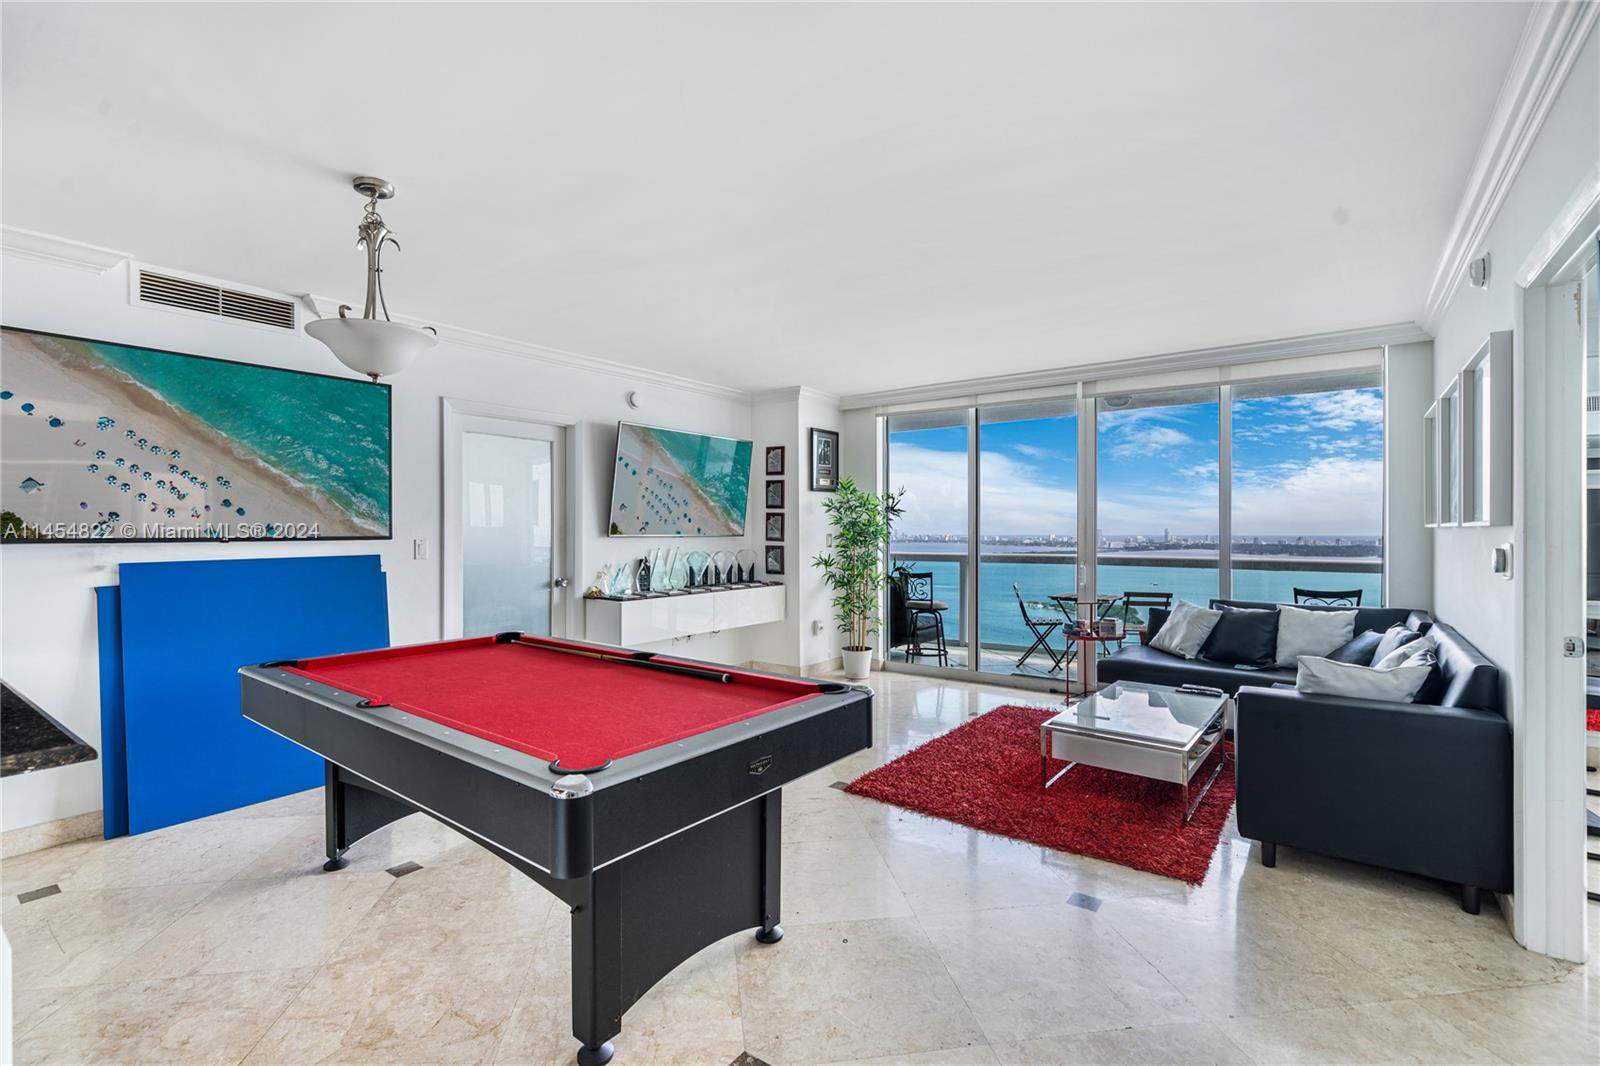 EVEN ON RAINY DAYS THESE VIEWS ARE MAJESTIC! Enjoy amazing panoramic views of Biscayne Bay from this gorgeous apartment in the sky! This 2 bedroom / 2 bathroom split plan condo has been upgraded to feature marble floors throughout the bedrooms and living areas, front loading washer/dryer, the kitchen overlooks the dining area with granite counter tops and top of the line stainless steel appliances. Beautiful pet friendly park in front of the building features a dog area, work out stations, tennis, volleyball and much more. Amenities at 1800 Club include a 2-story lobby, 24-hour valet parking, on-site waterfront restaurant, heated swimming pool, Zen garden, 2-story recreational floor with deck, gym, yoga/aerobics studio, sauna, steam room, massage rooms, party room and billiards room.